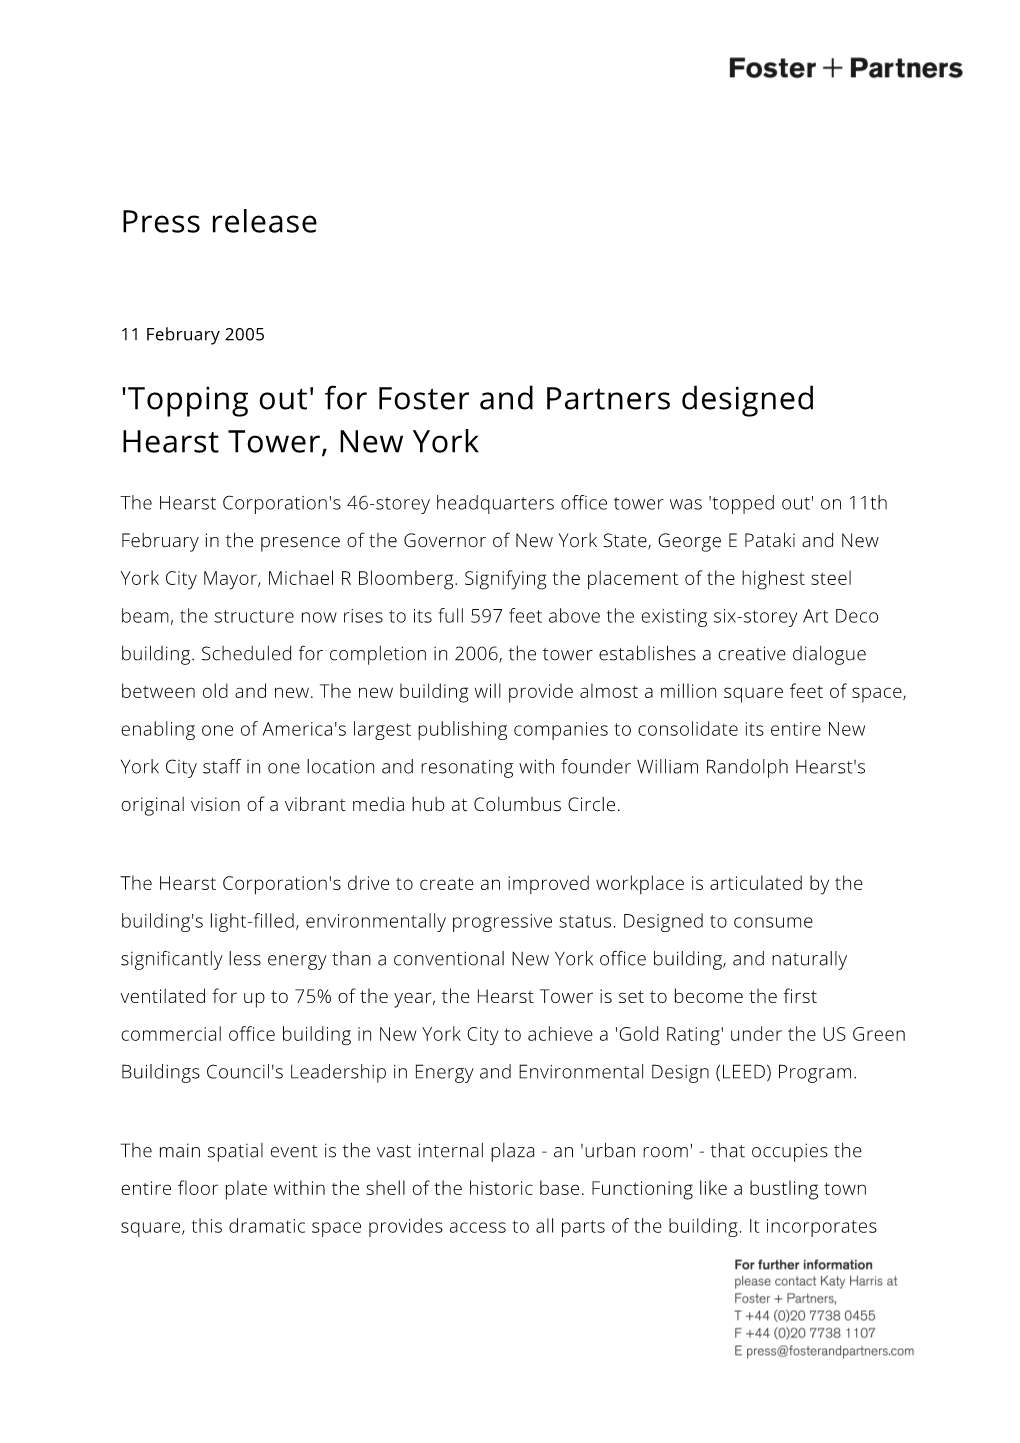 Press Release 'Topping Out' for Foster and Partners Designed Hearst Tower, New York